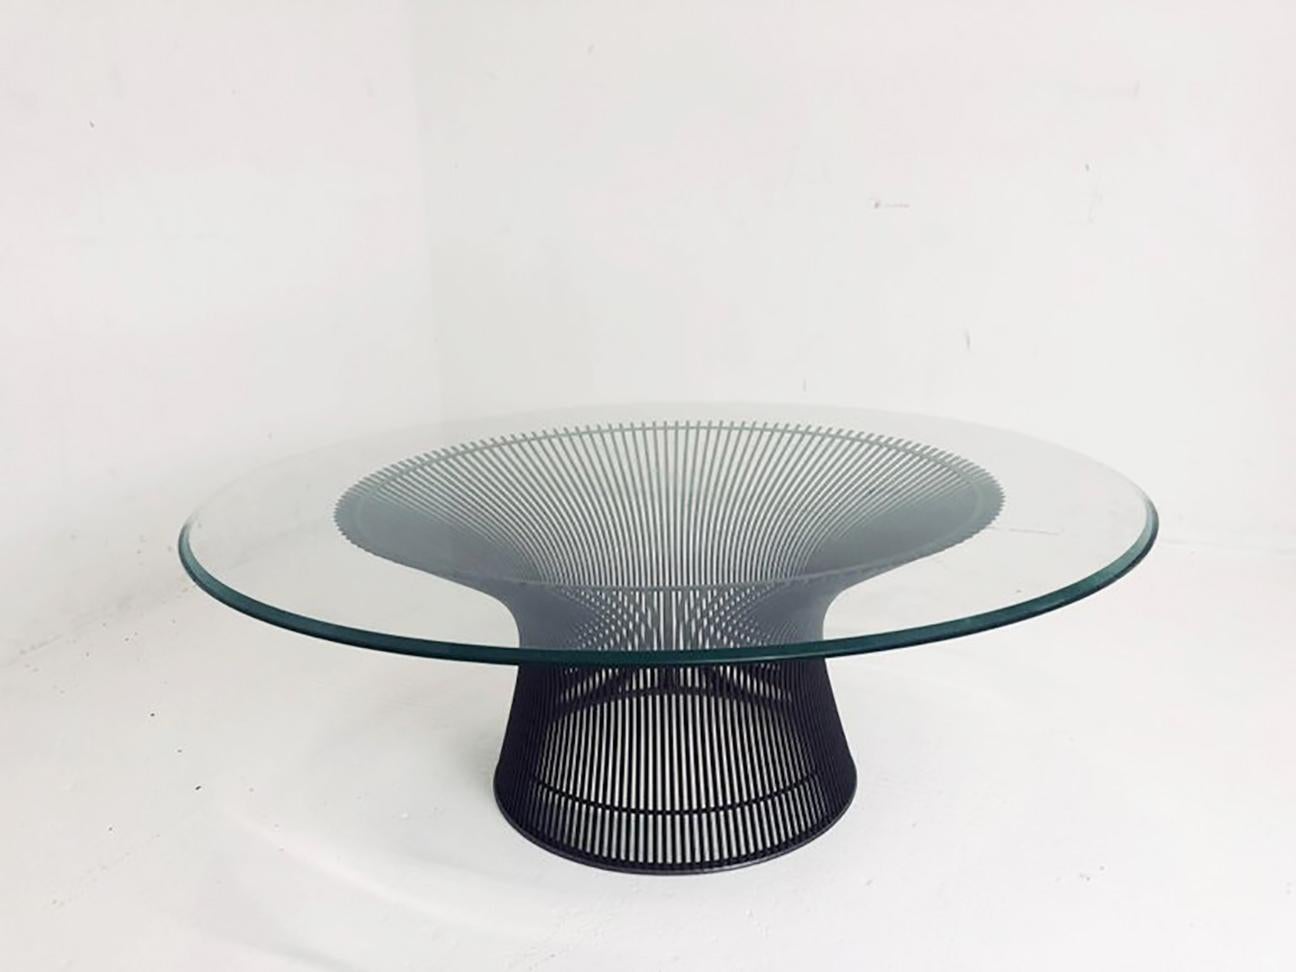 Warren Platner bronze coffee table. In good vintage condition with visible wear from use and age of piece, circa 1960s.

Dimensions: 42